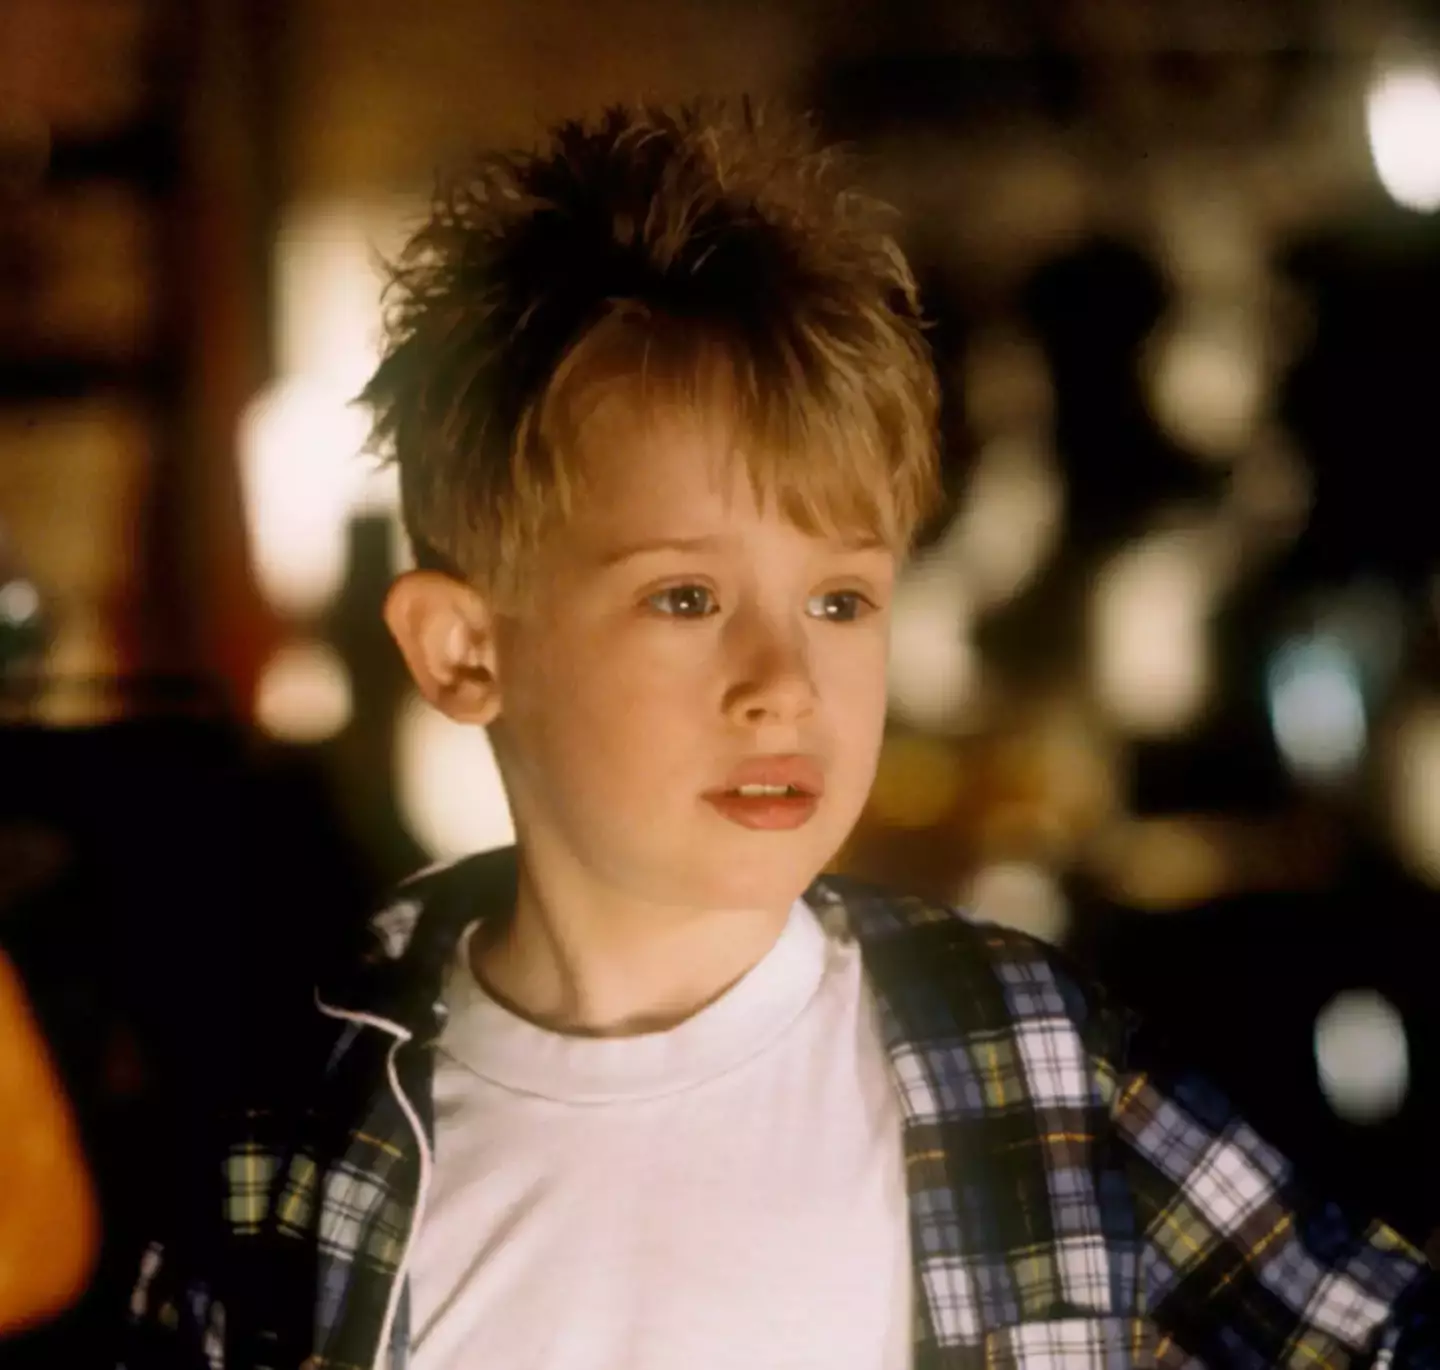 How did Kevin get left Home Alone?